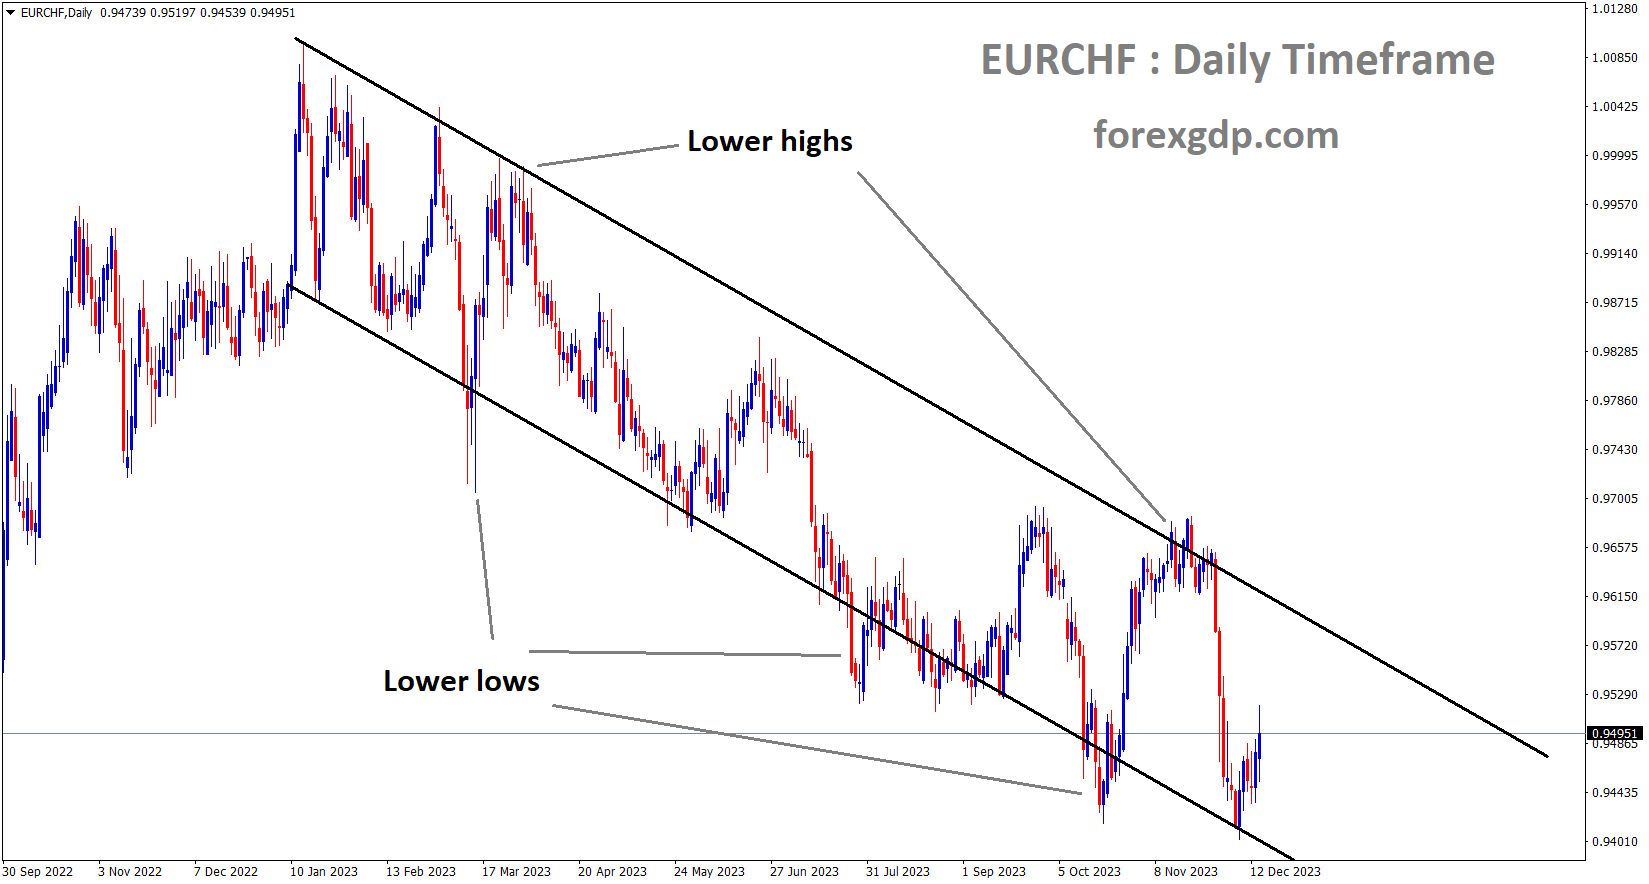 EURCHF is moving in the Descending channel and the market has rebounded from the lower low area of the channel